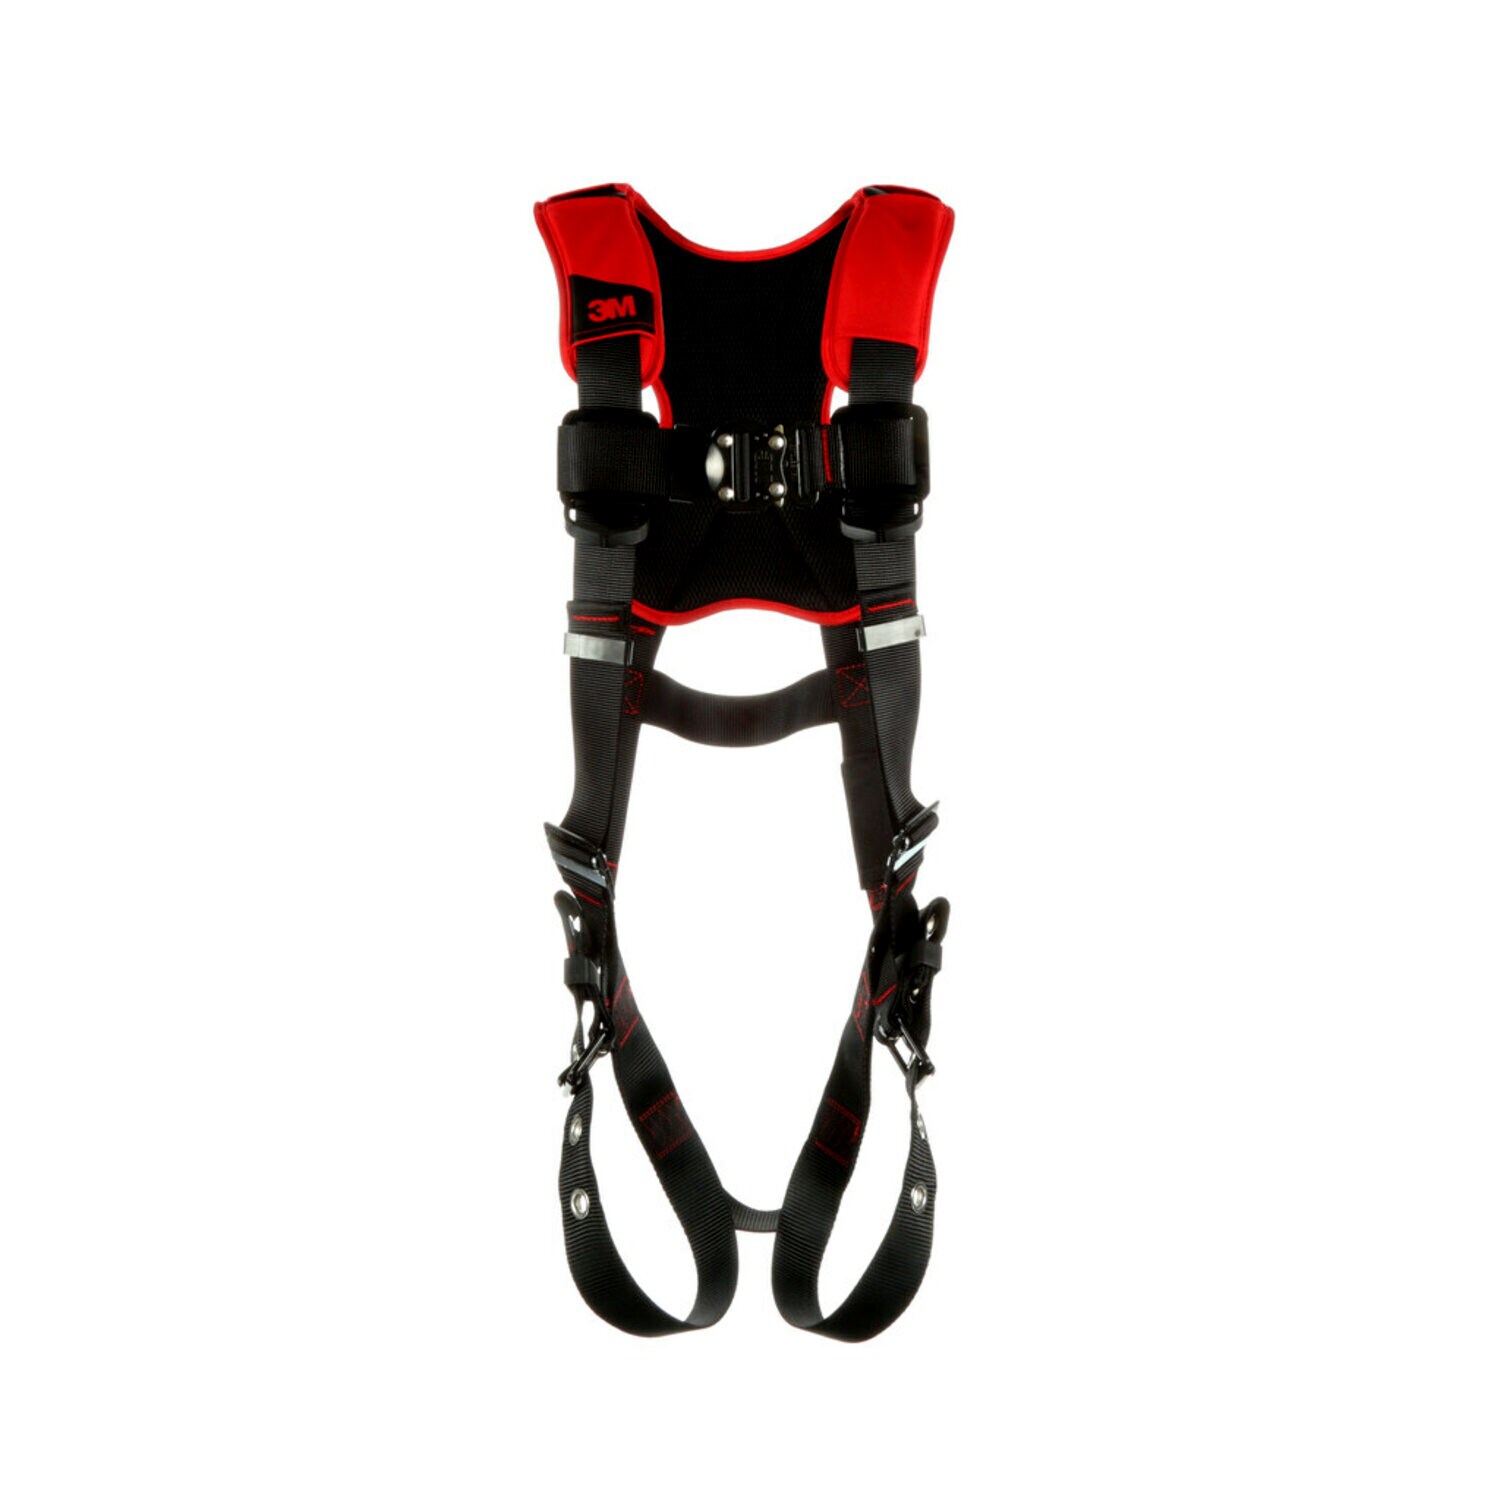 7012816696 - 3M Protecta P200 Comfort Vest Safety Harness 1161420, Small